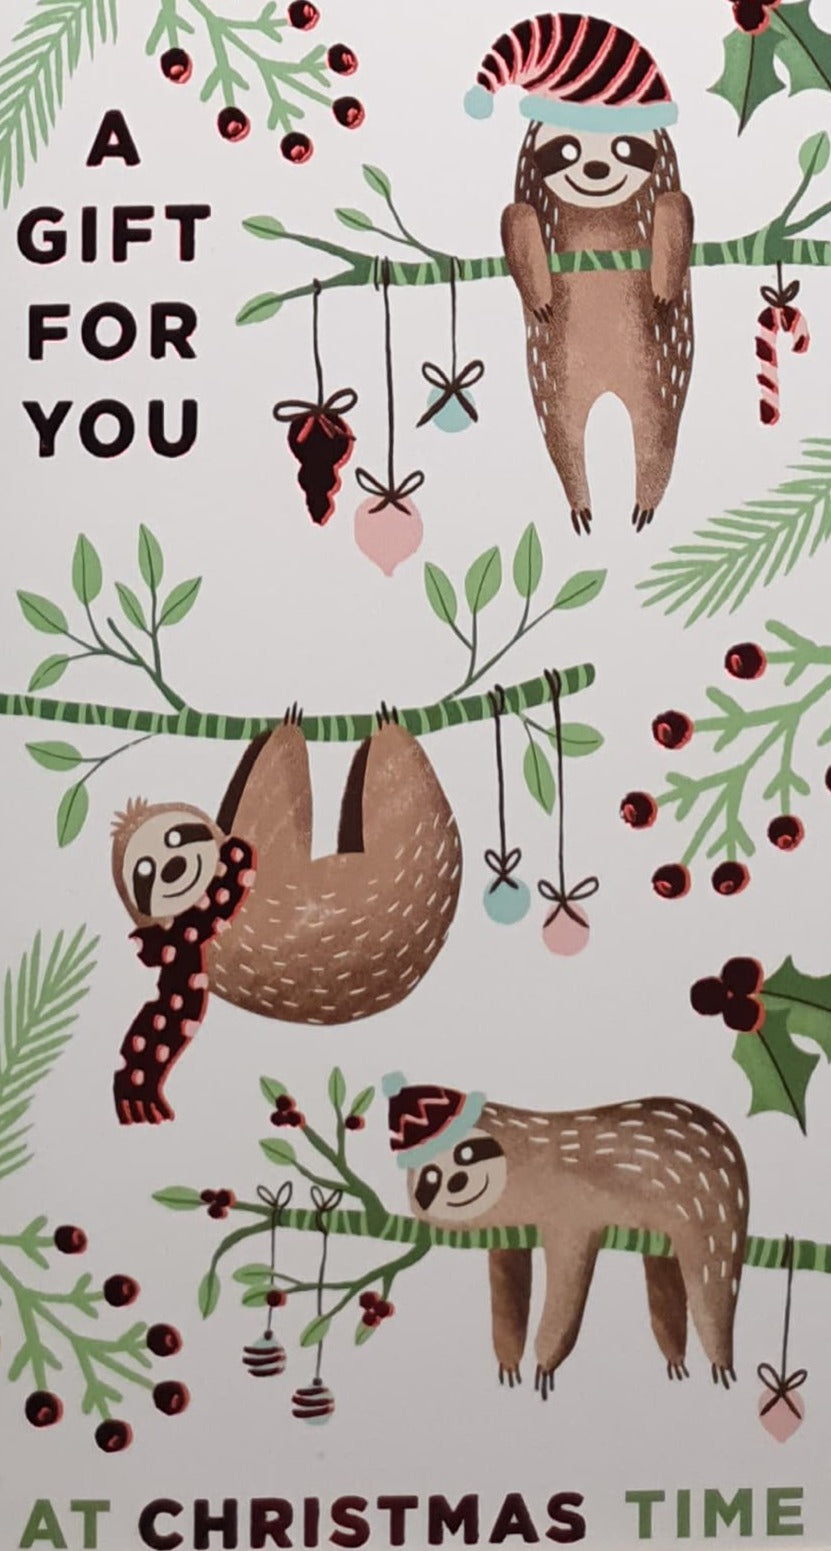 Money Wallet Christmas Card - Cute Christmas Sloths Hanging from Trees